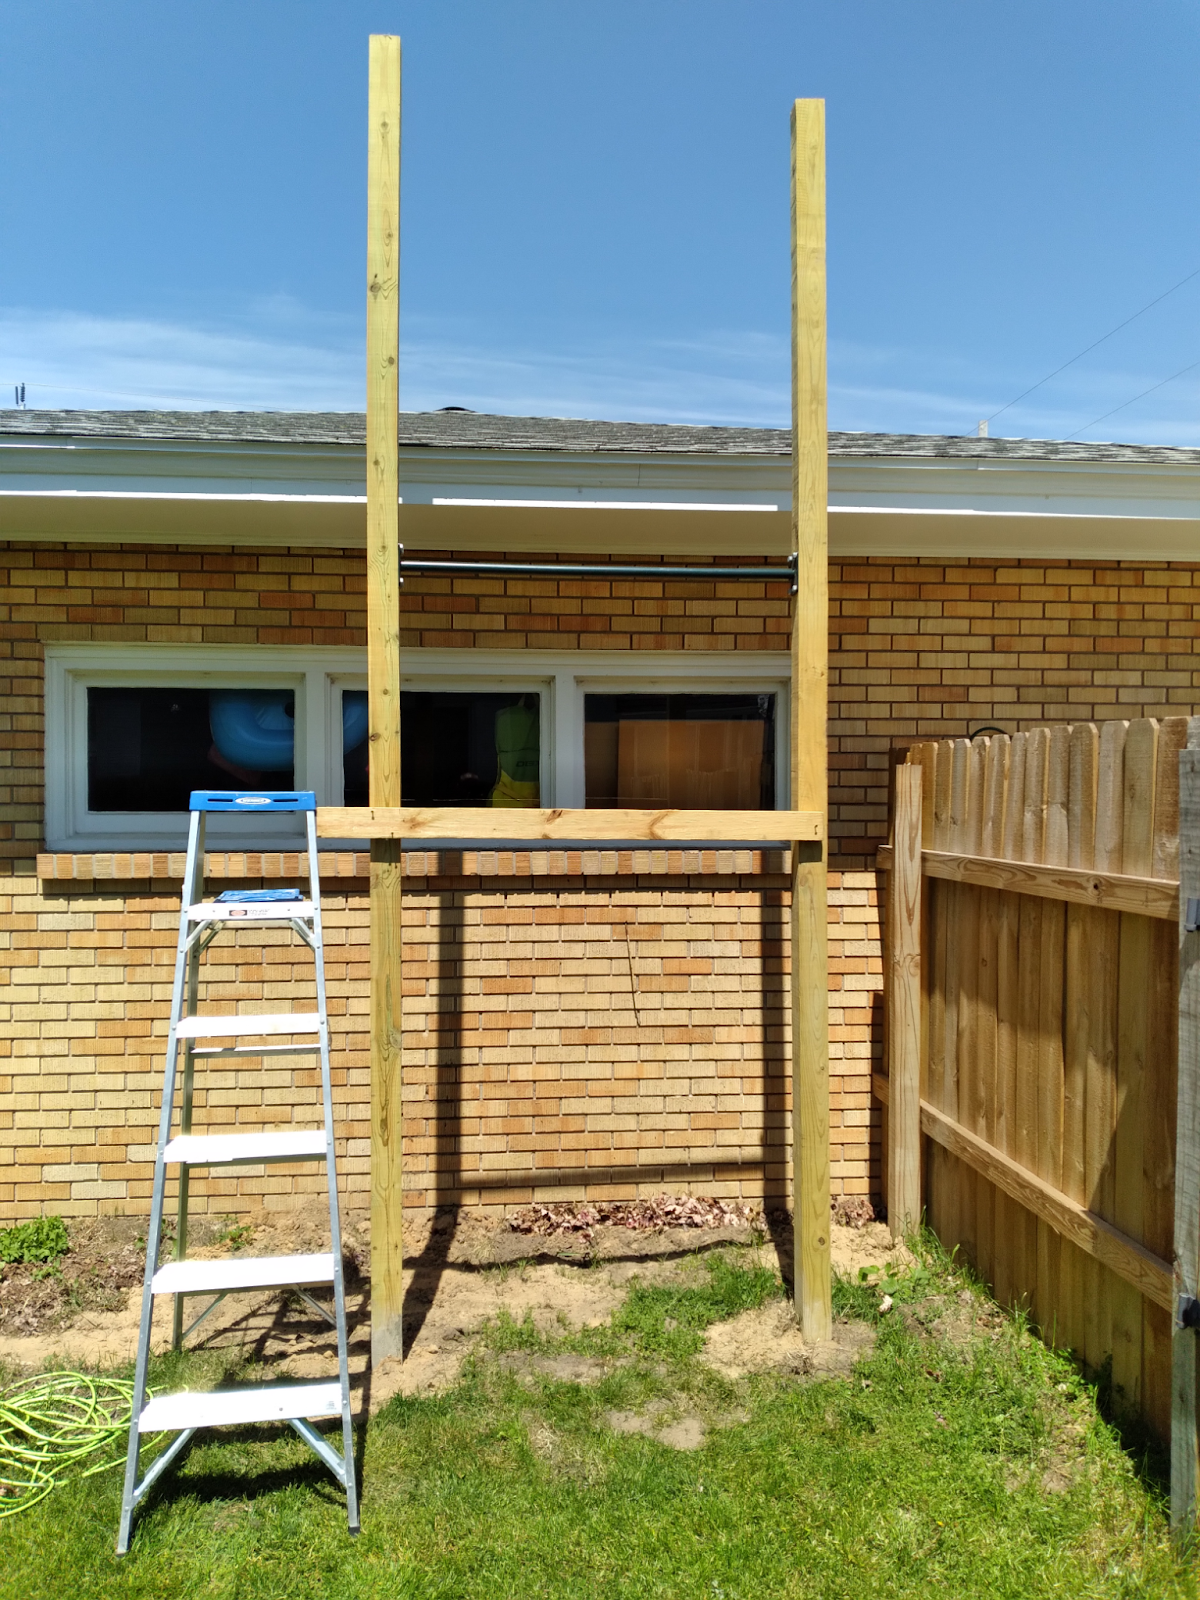 Diy Outdoor Pull-Up Bar Instructions - Garage Gym Experiment